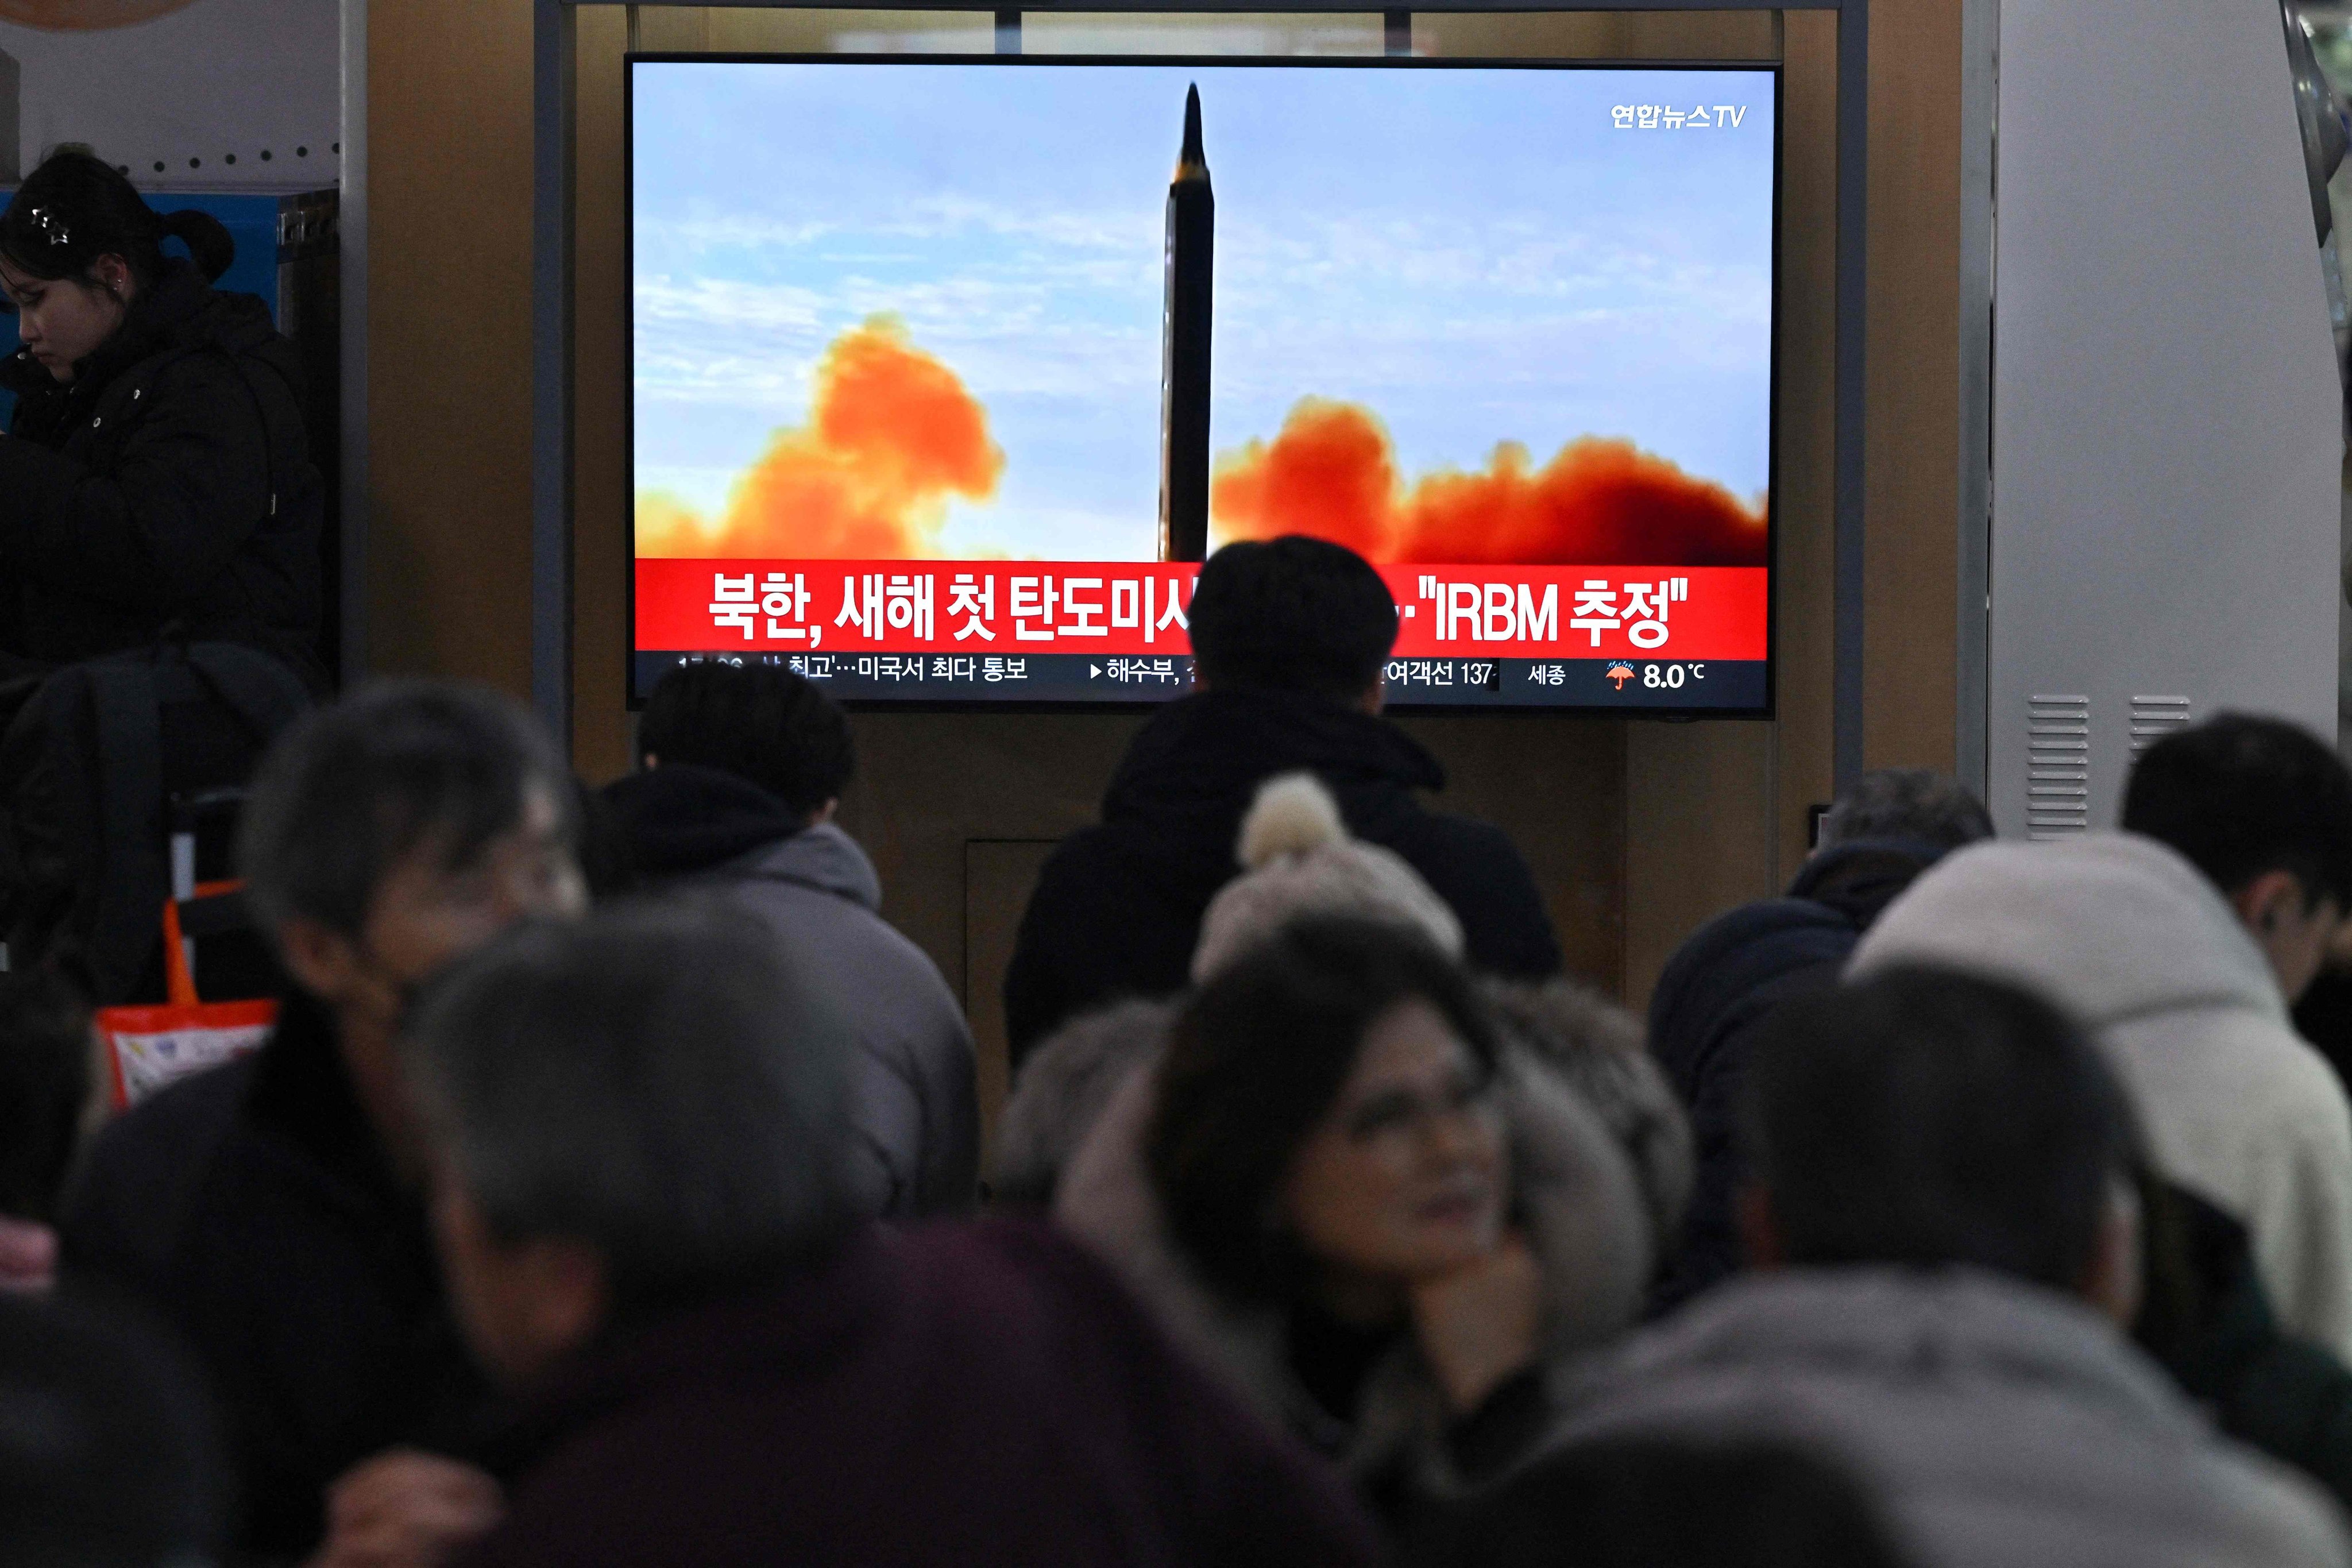 People watching a news broadcast with file footage of a North Korean missile test at a railway station in Seoul on January 14 after the North fired a ballistic missile on the same day. Photo: AFP